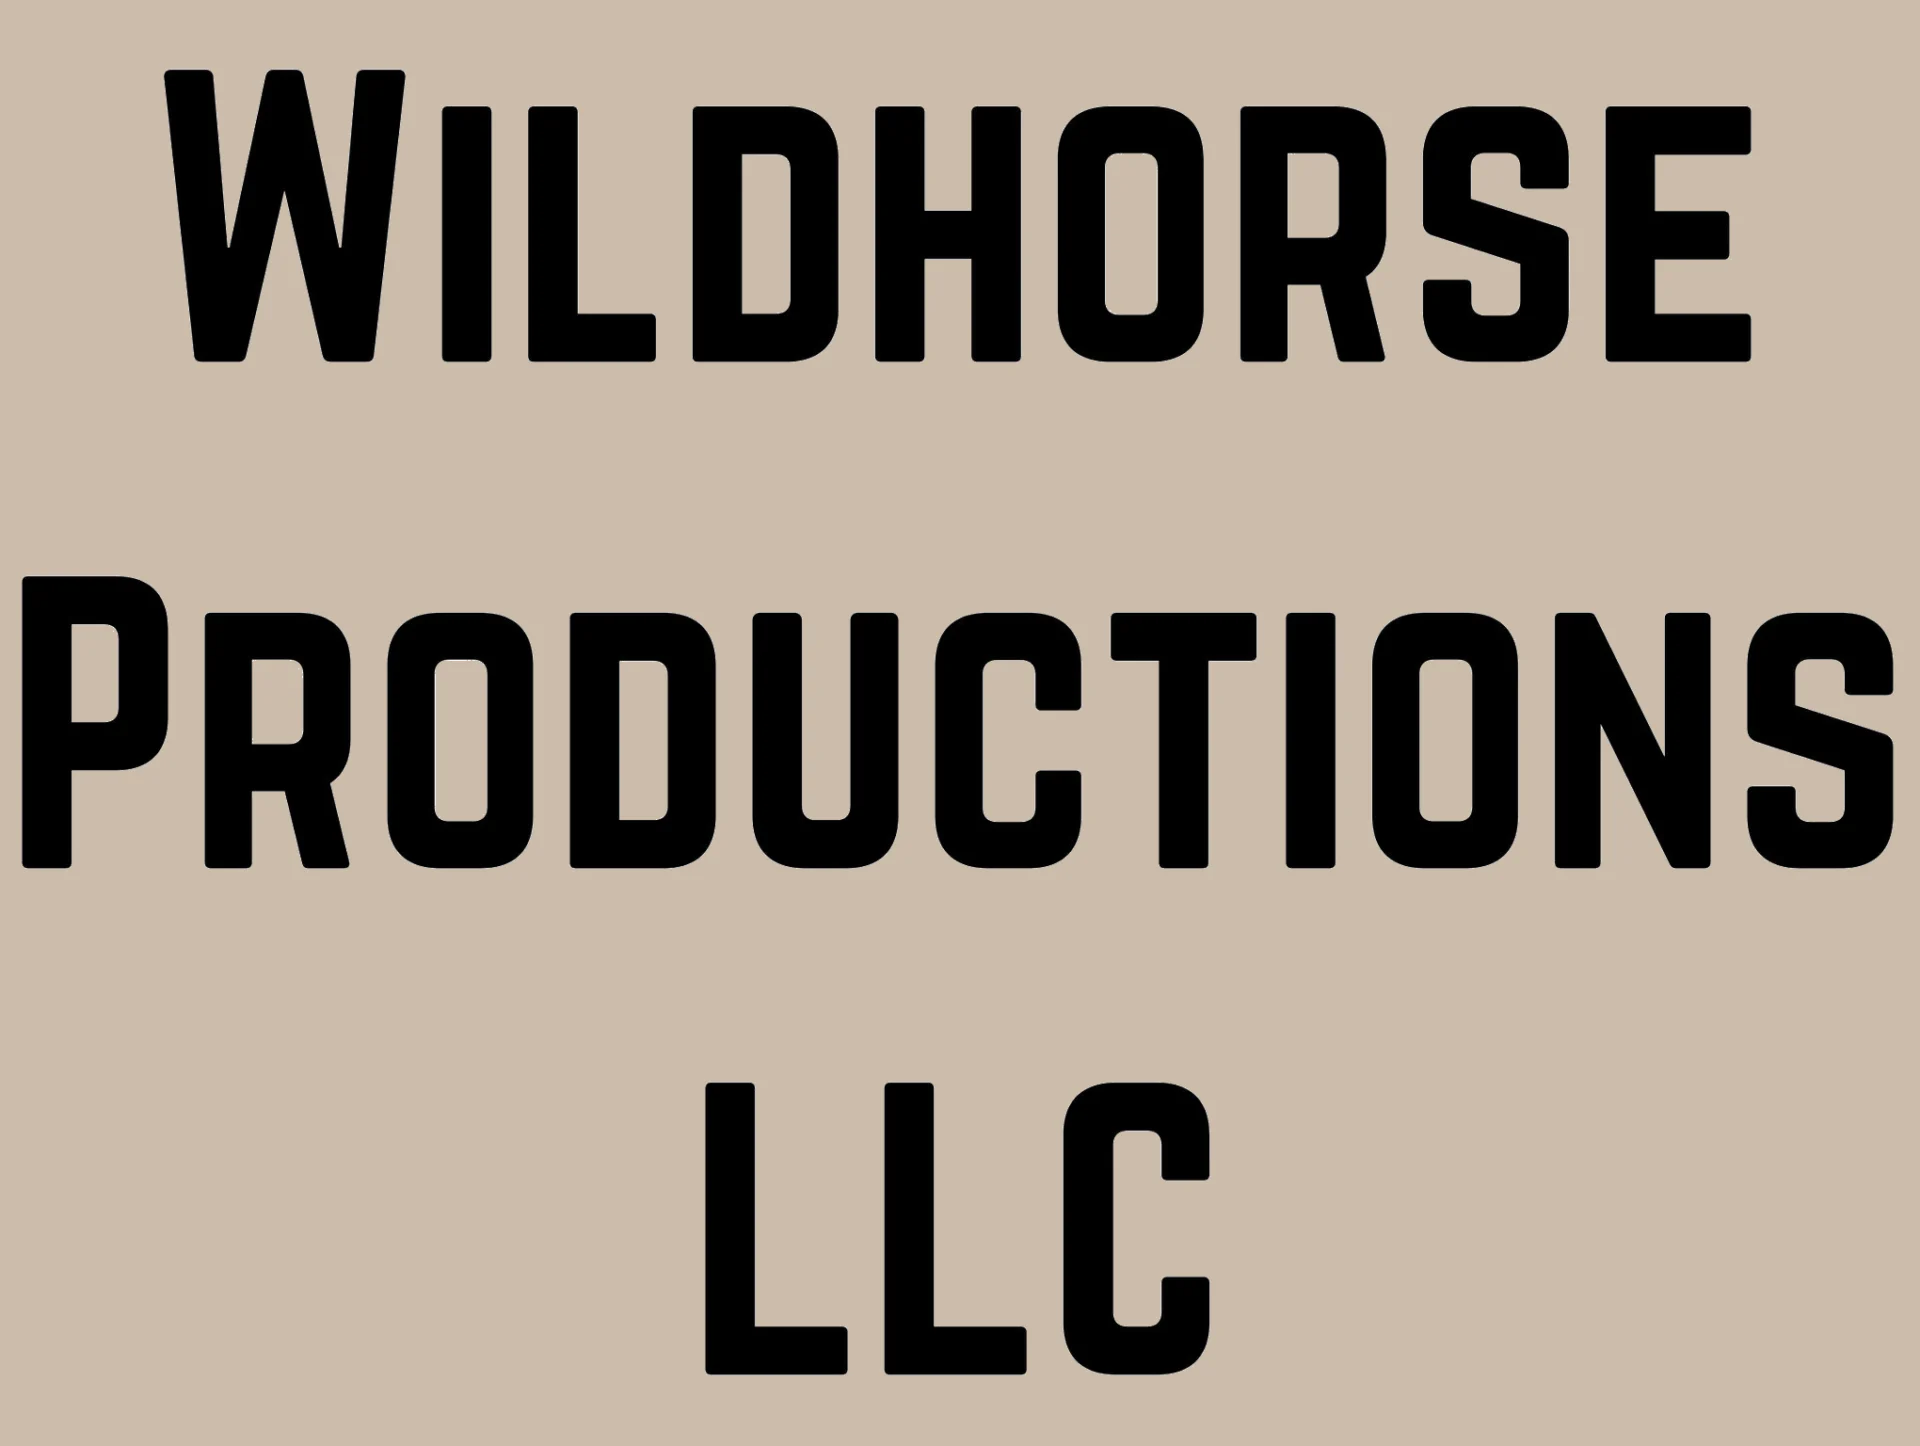 A picture of the wildhorse production llc logo.